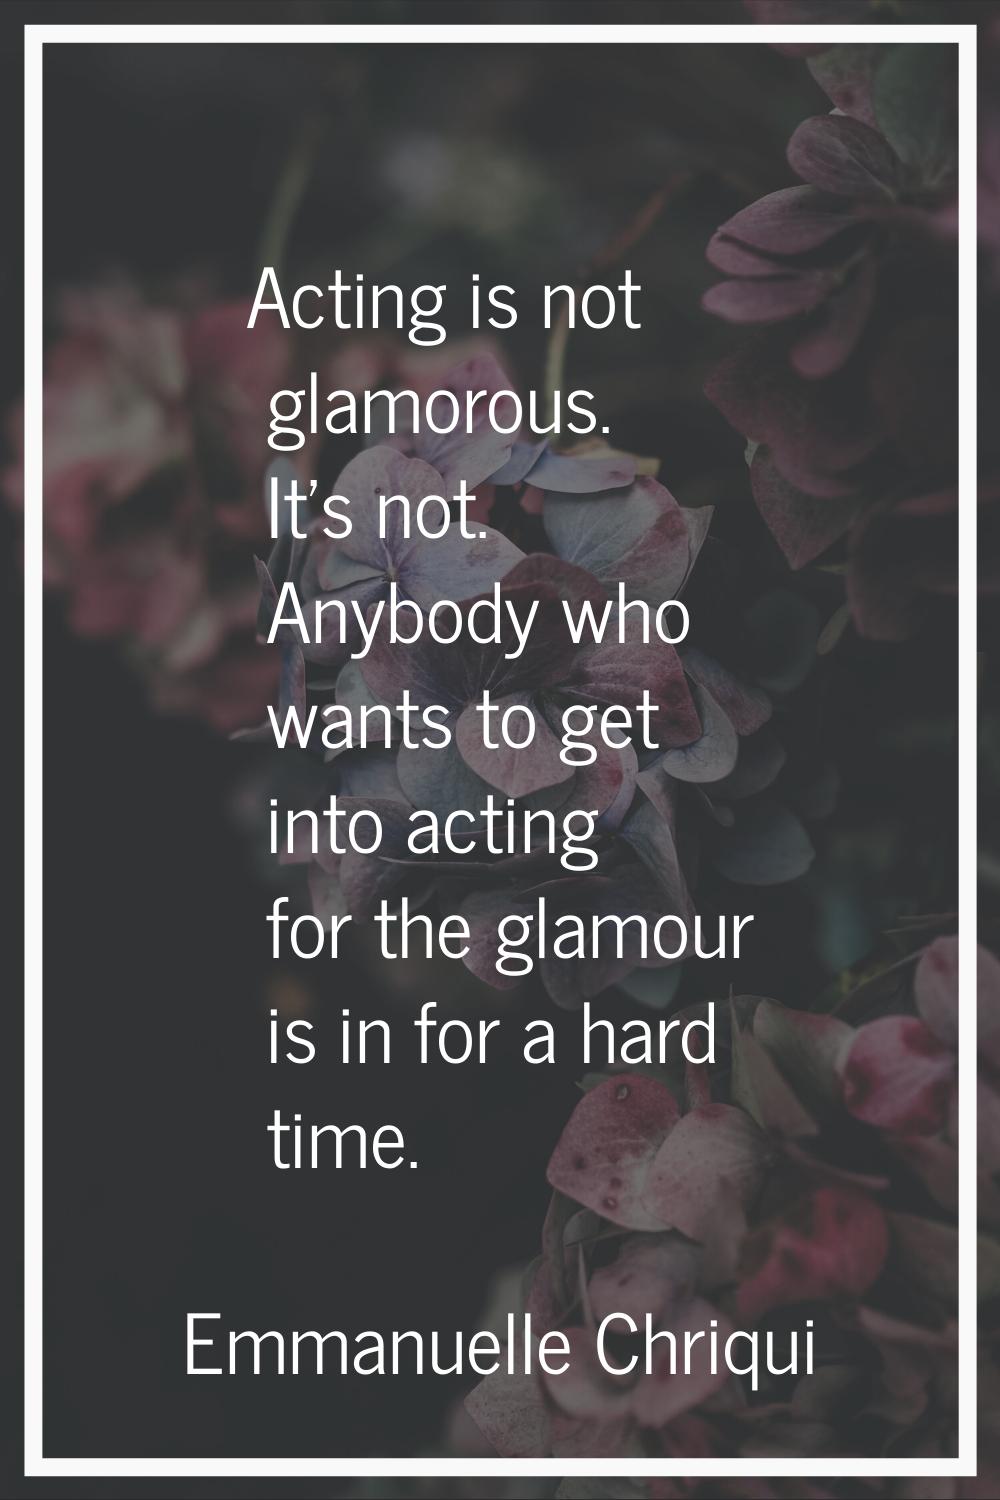 Acting is not glamorous. It's not. Anybody who wants to get into acting for the glamour is in for a